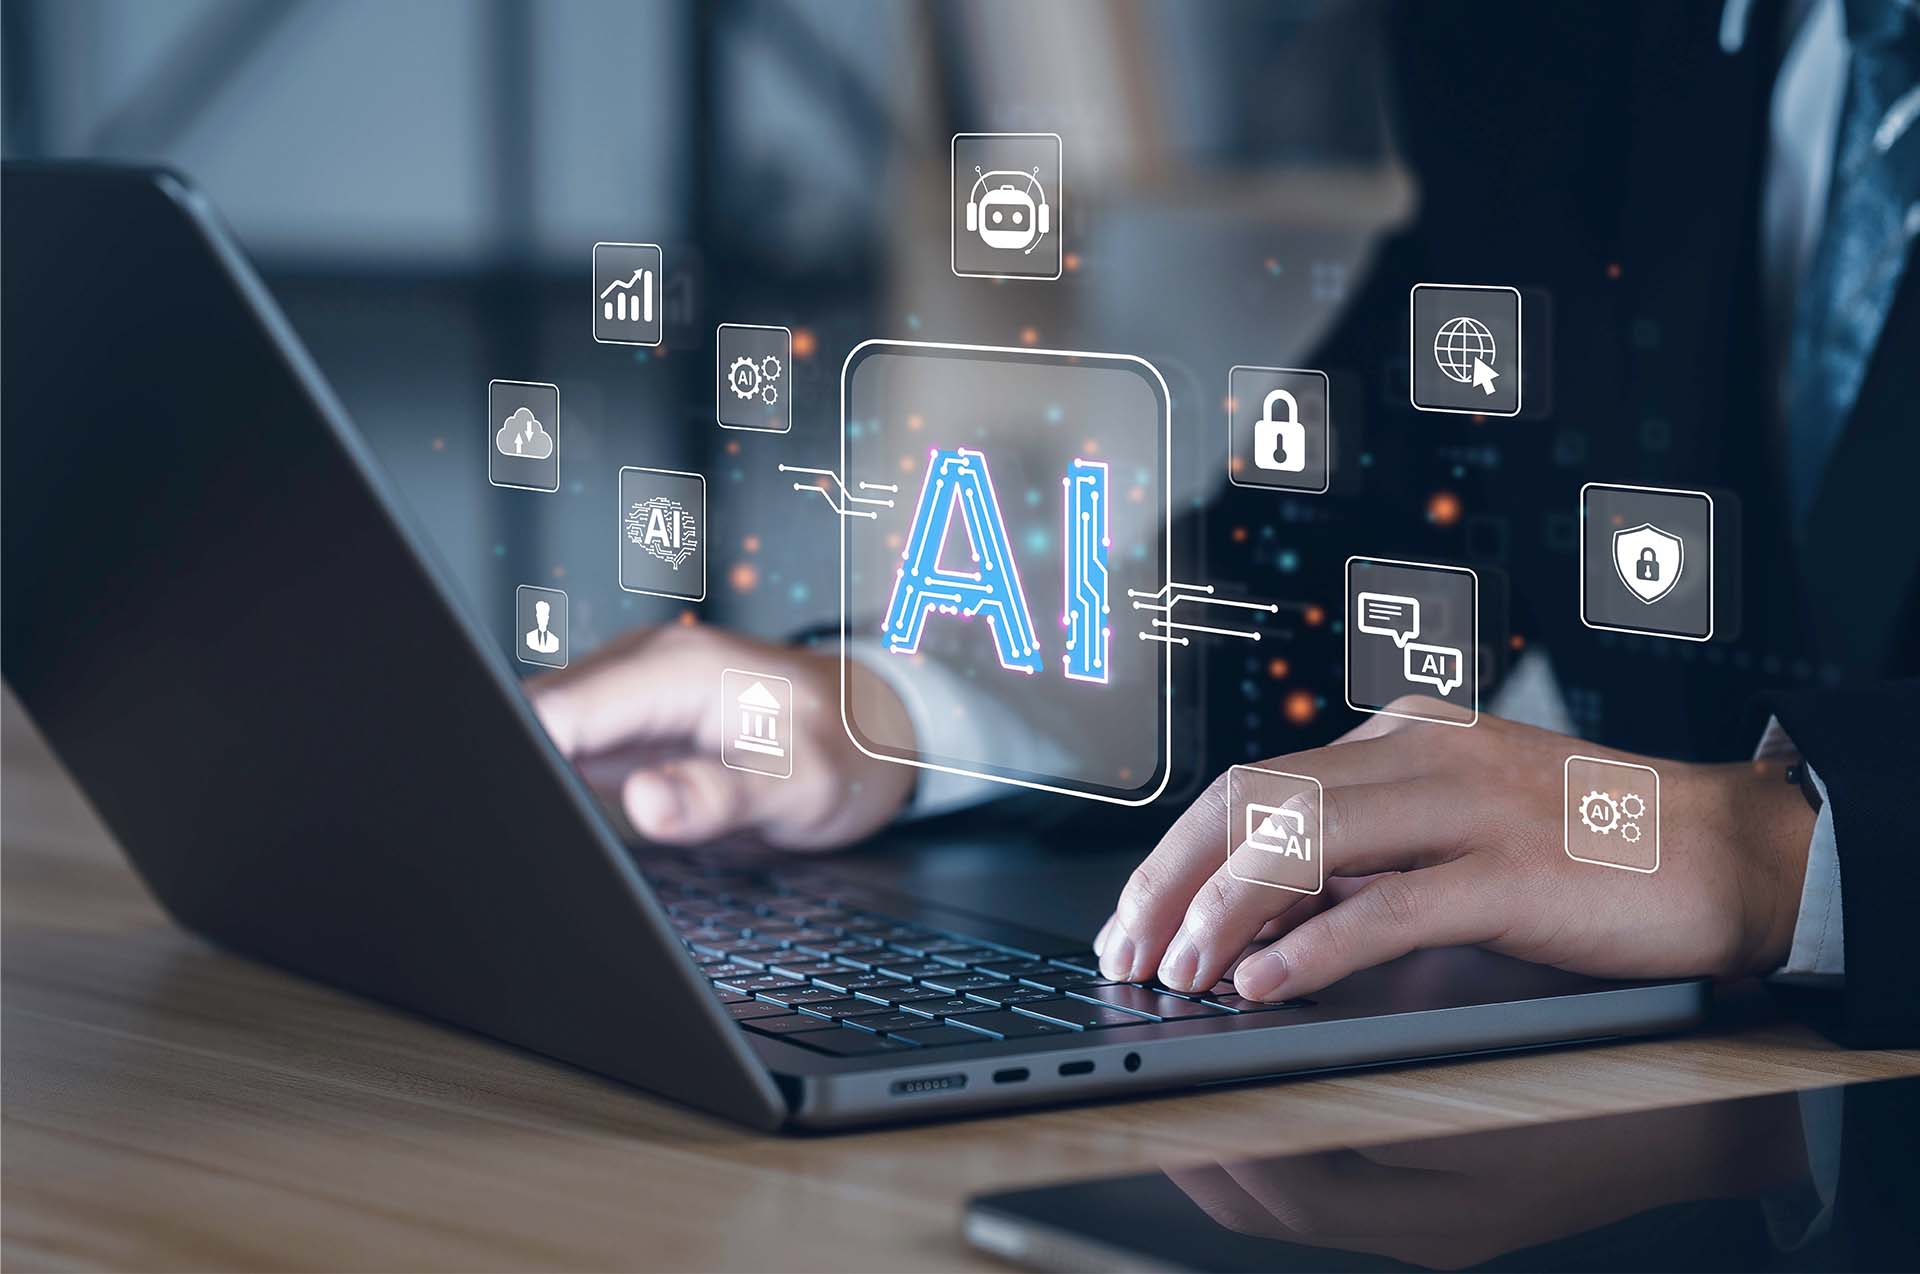 Integrating AI in e-procurement of hospitality industry in the UAE